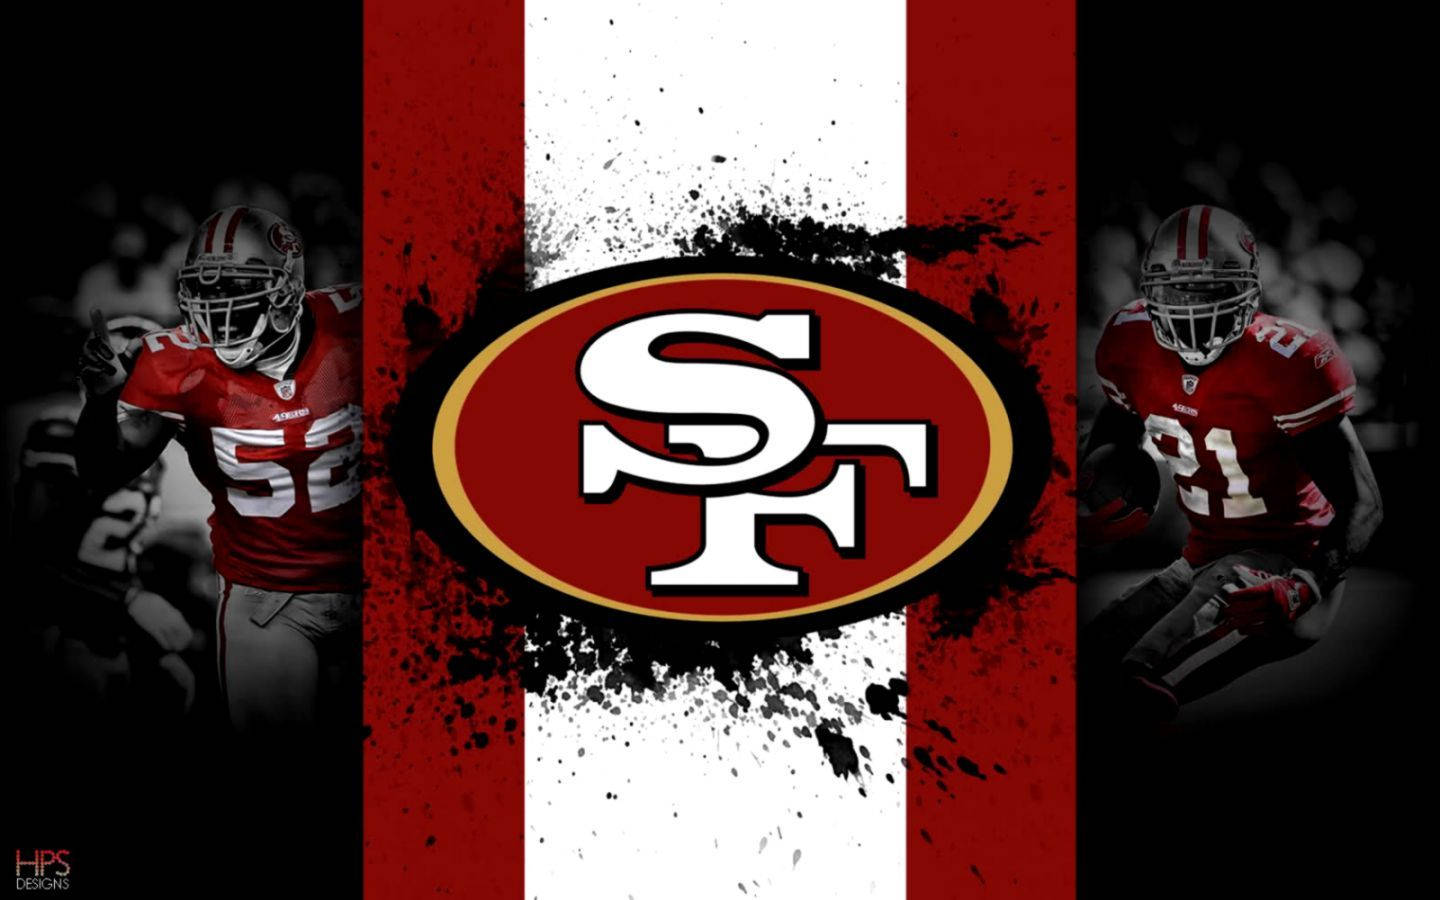 Patrick Willis And Deion Sanders Taking The San Francisco 49ers To Victory. Background